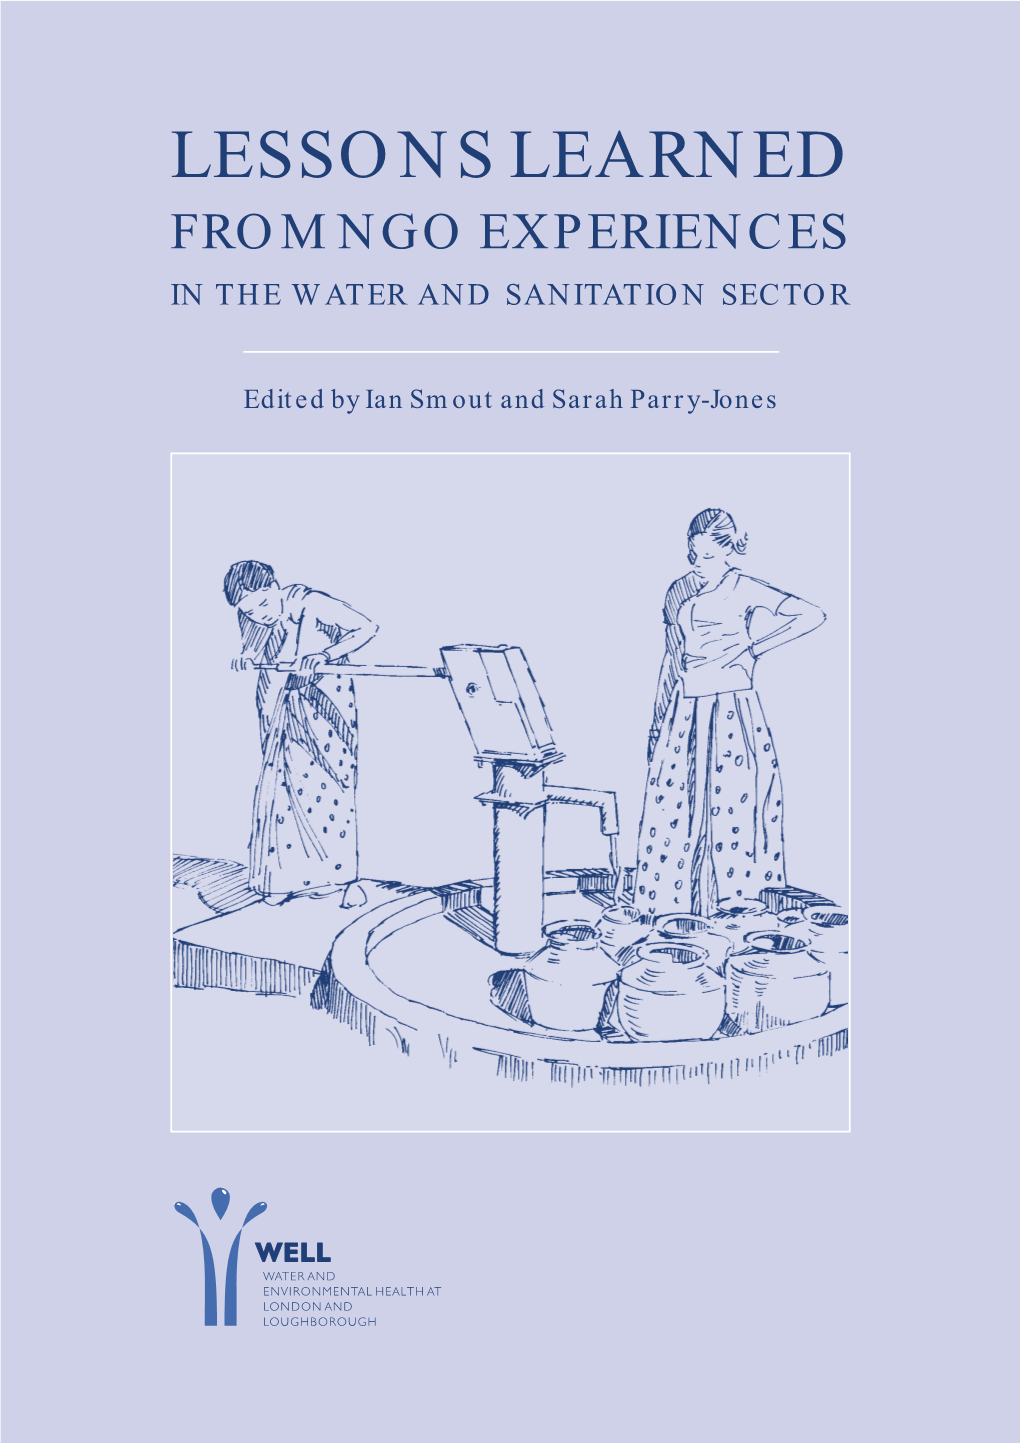 Lessons Learned from Ngo Experiences in the Water and Sanitation Sector